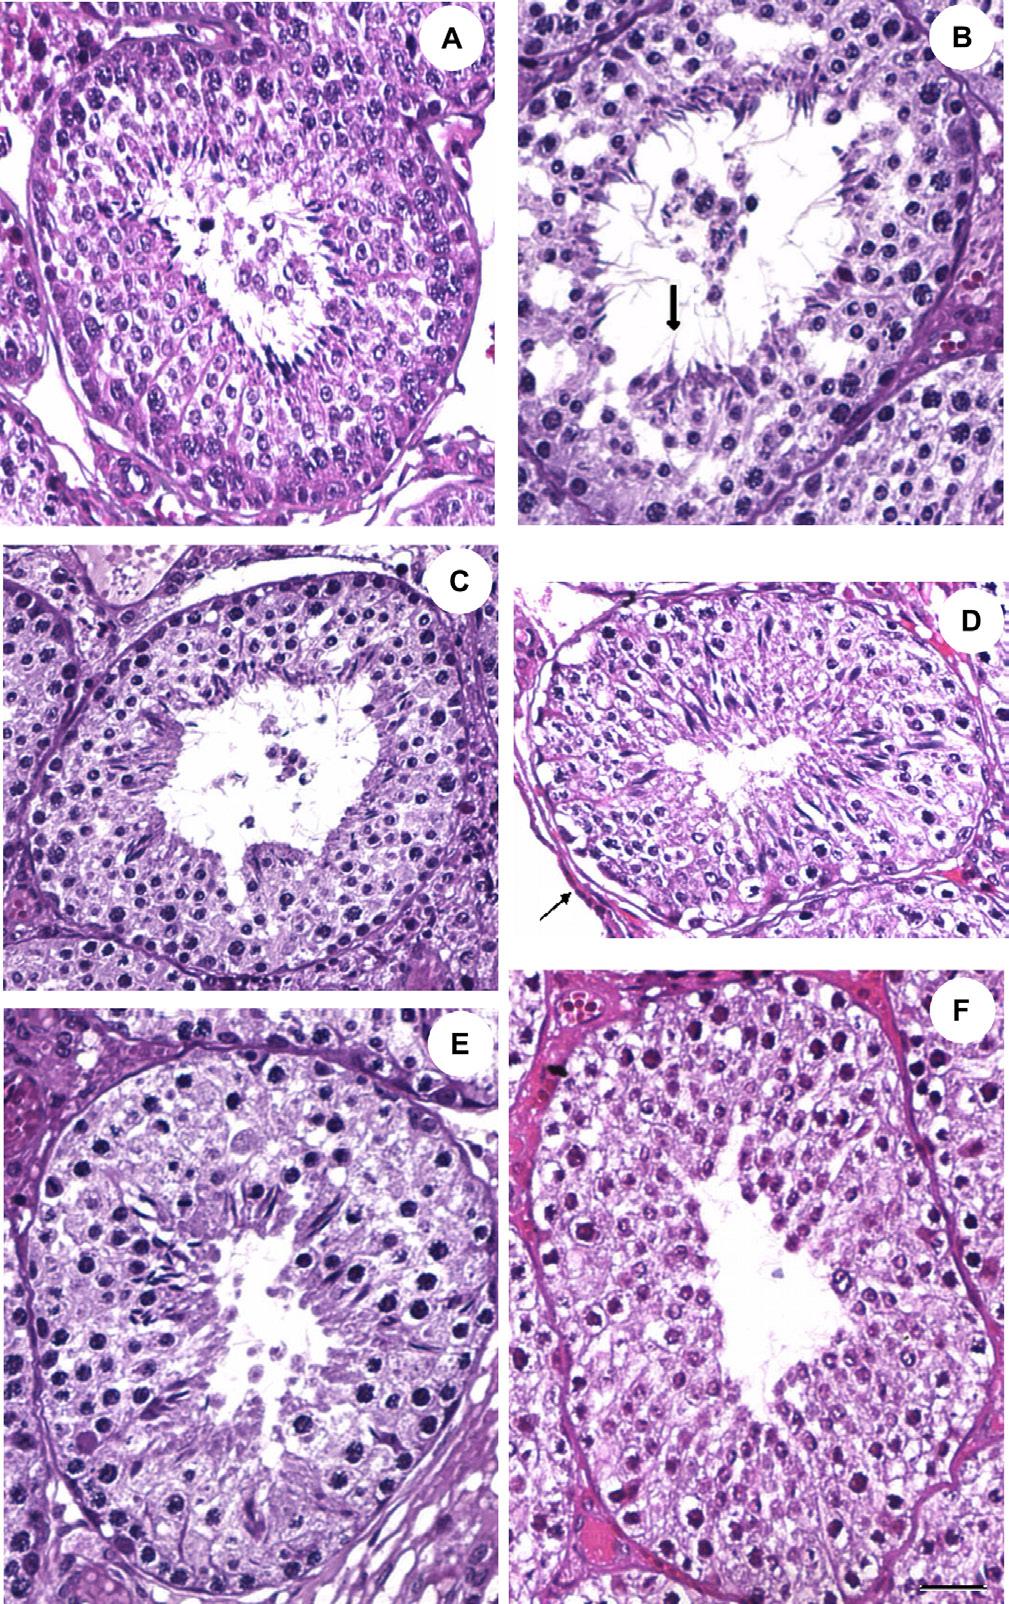 1409 Figure 1. Standardization of Johnsen-like scores in the seminiferous tubule cross-sections of control group rabbits stained with hematoxylin-eosin (HE). A. Johnsen-like score 10. B.